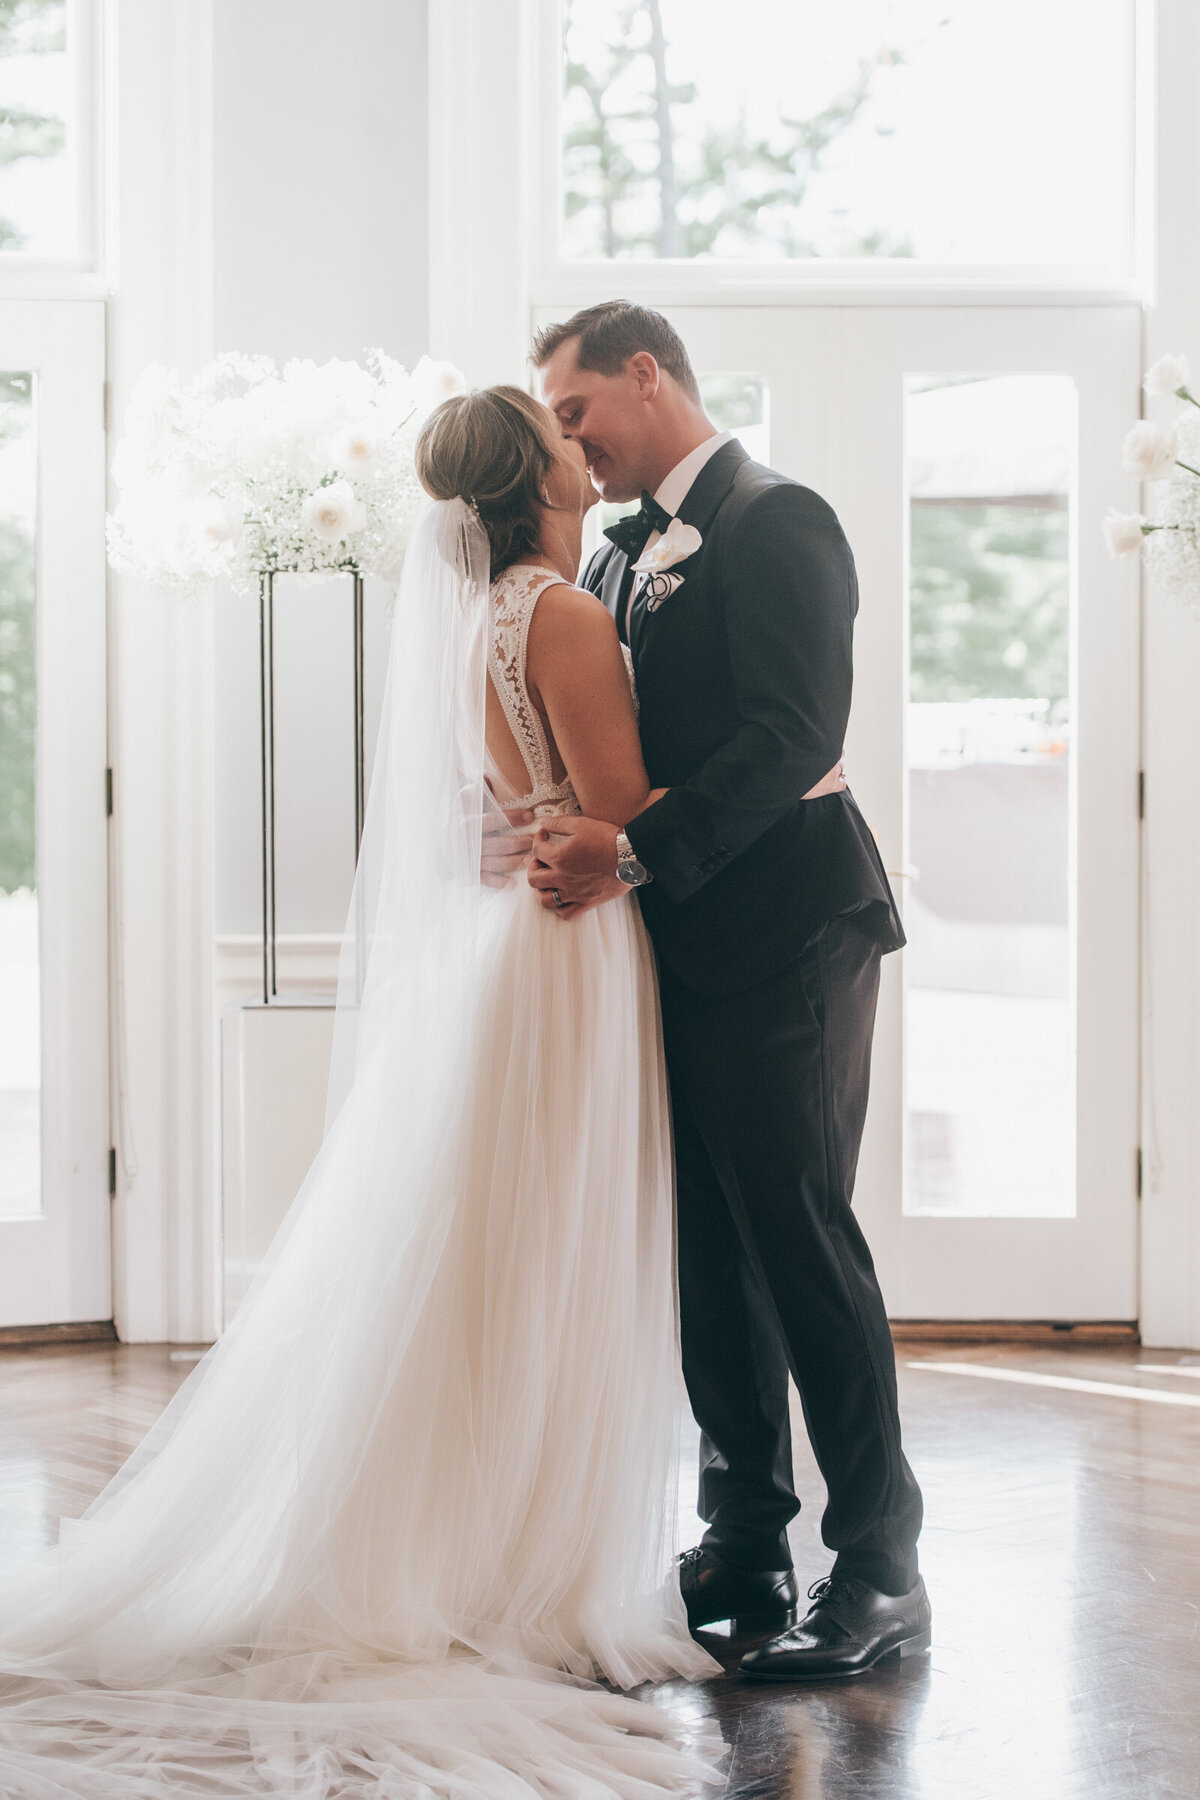 Bride and groom first kiss during their indoor wedding ceremony at the London Hunt Club